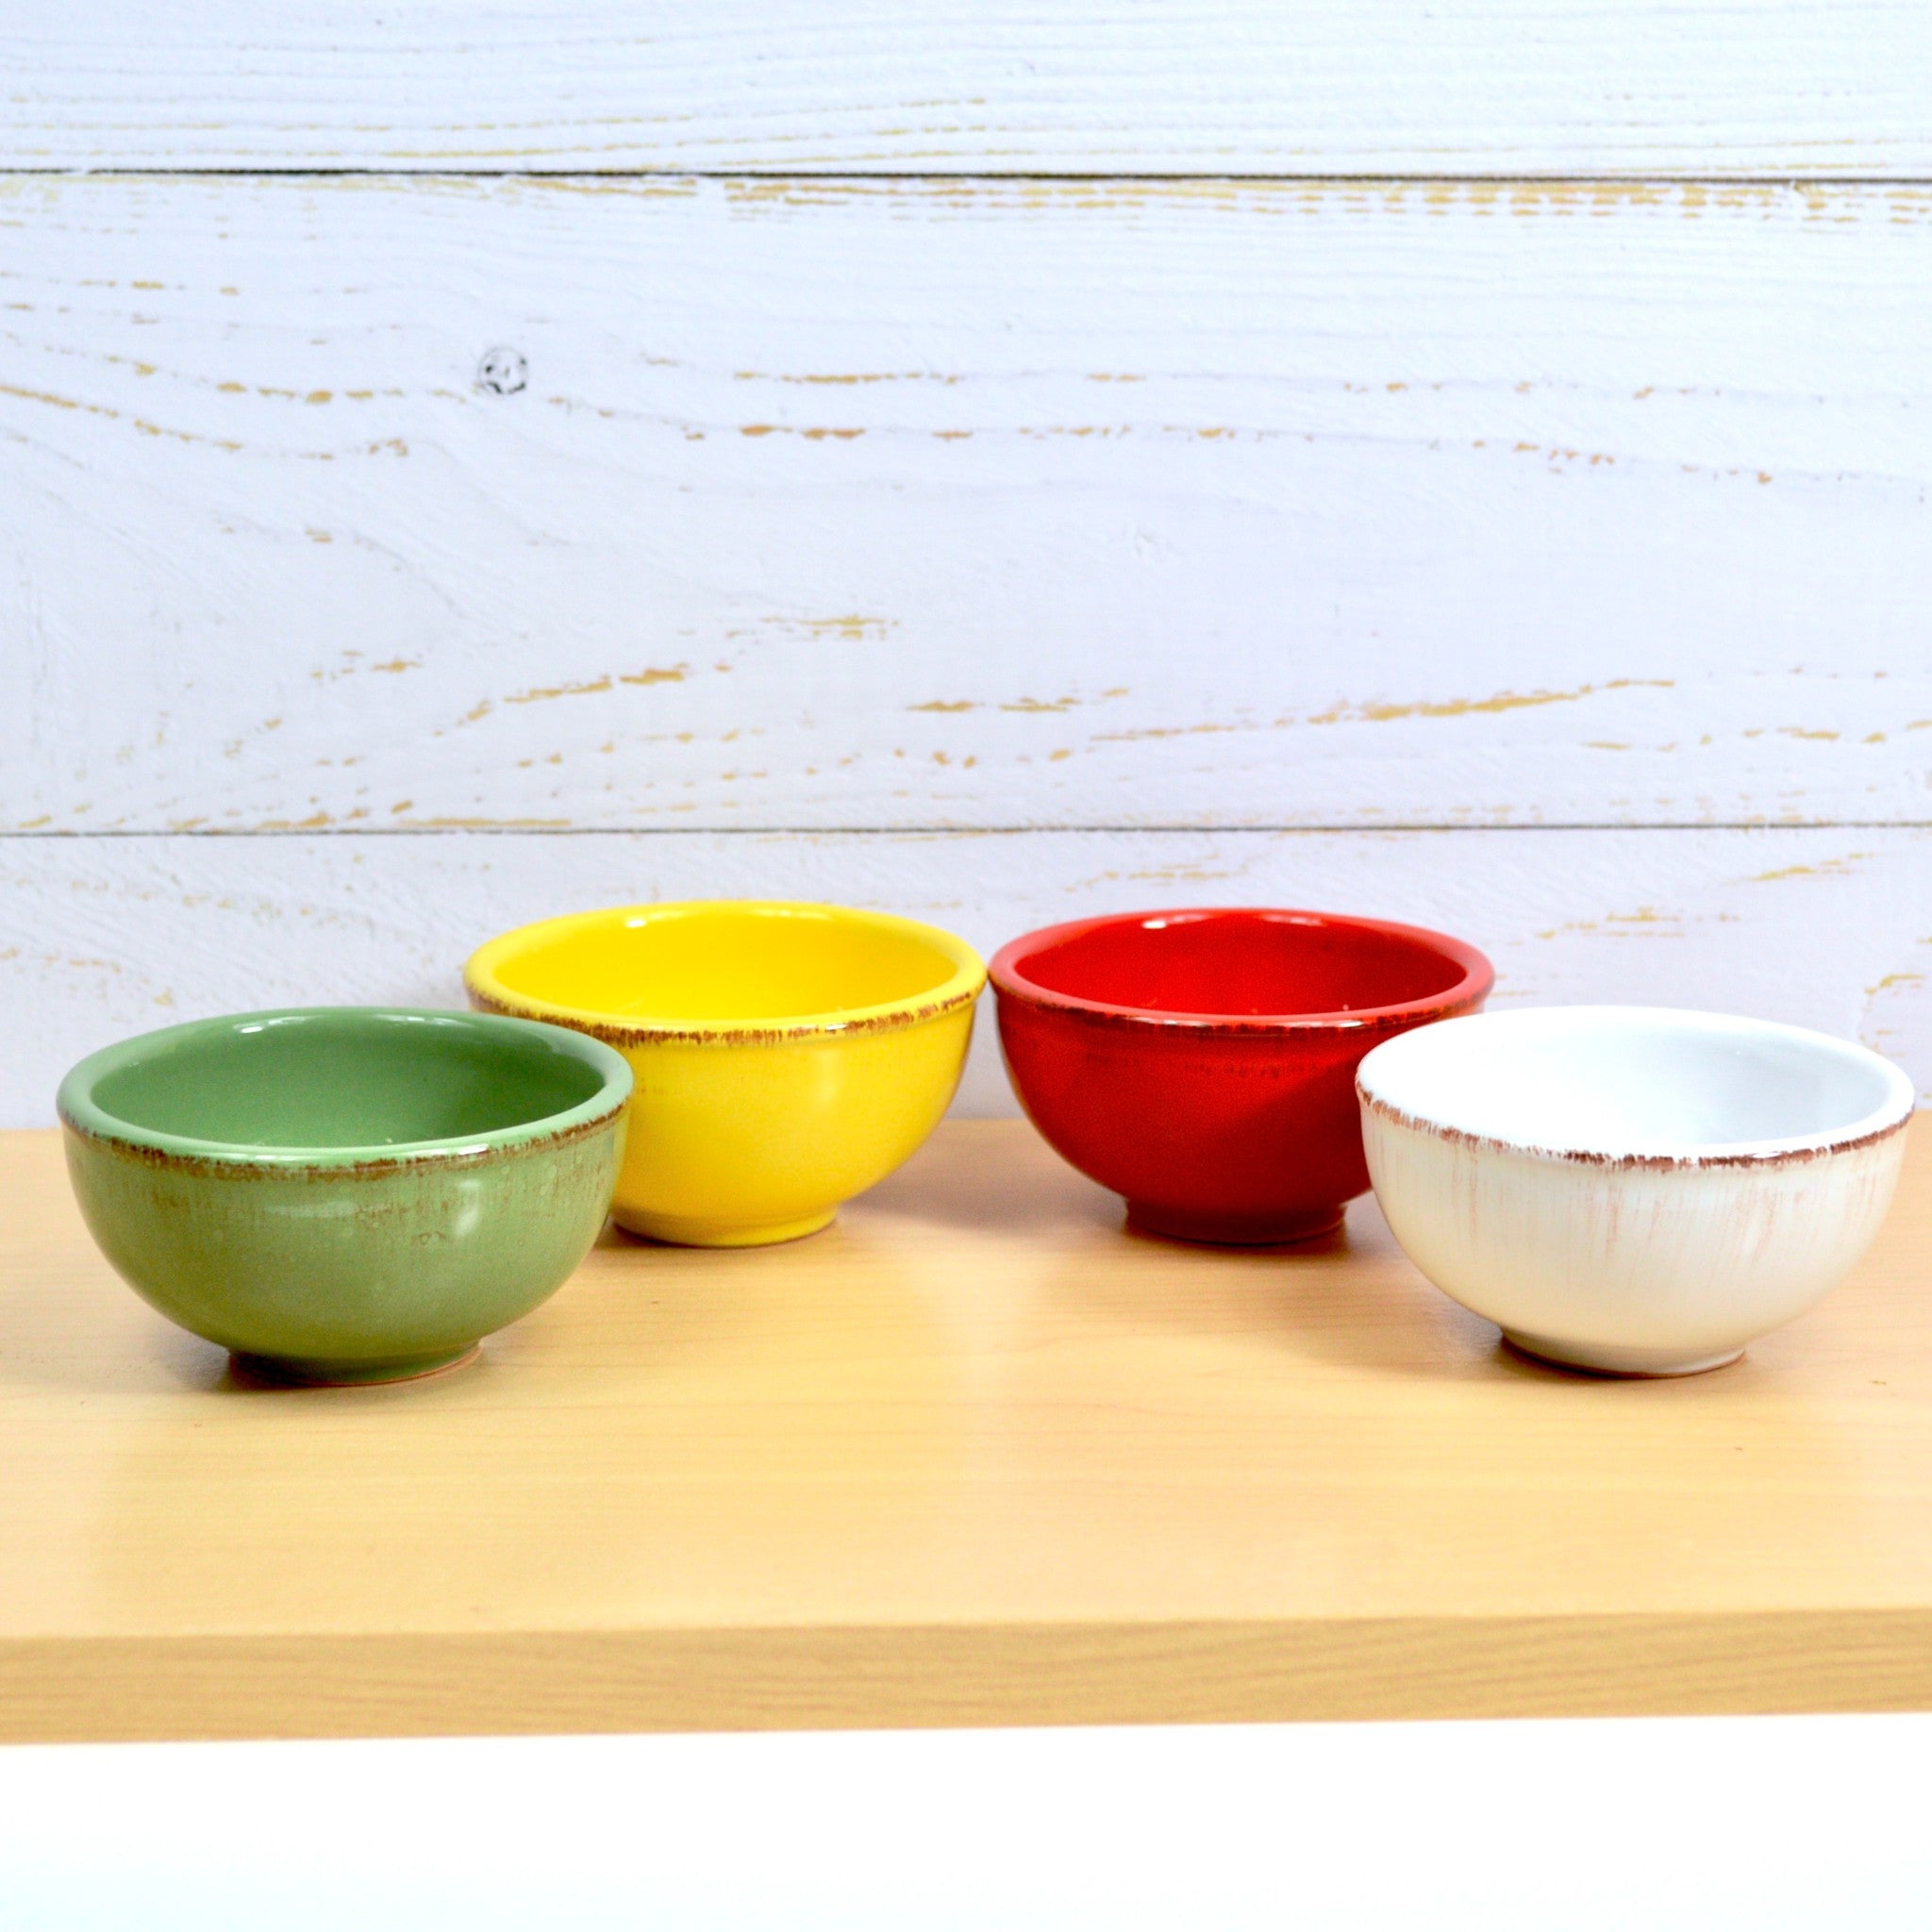 Tuscan Ceramic Dipping Bowls, Set of 4, Made in Italy